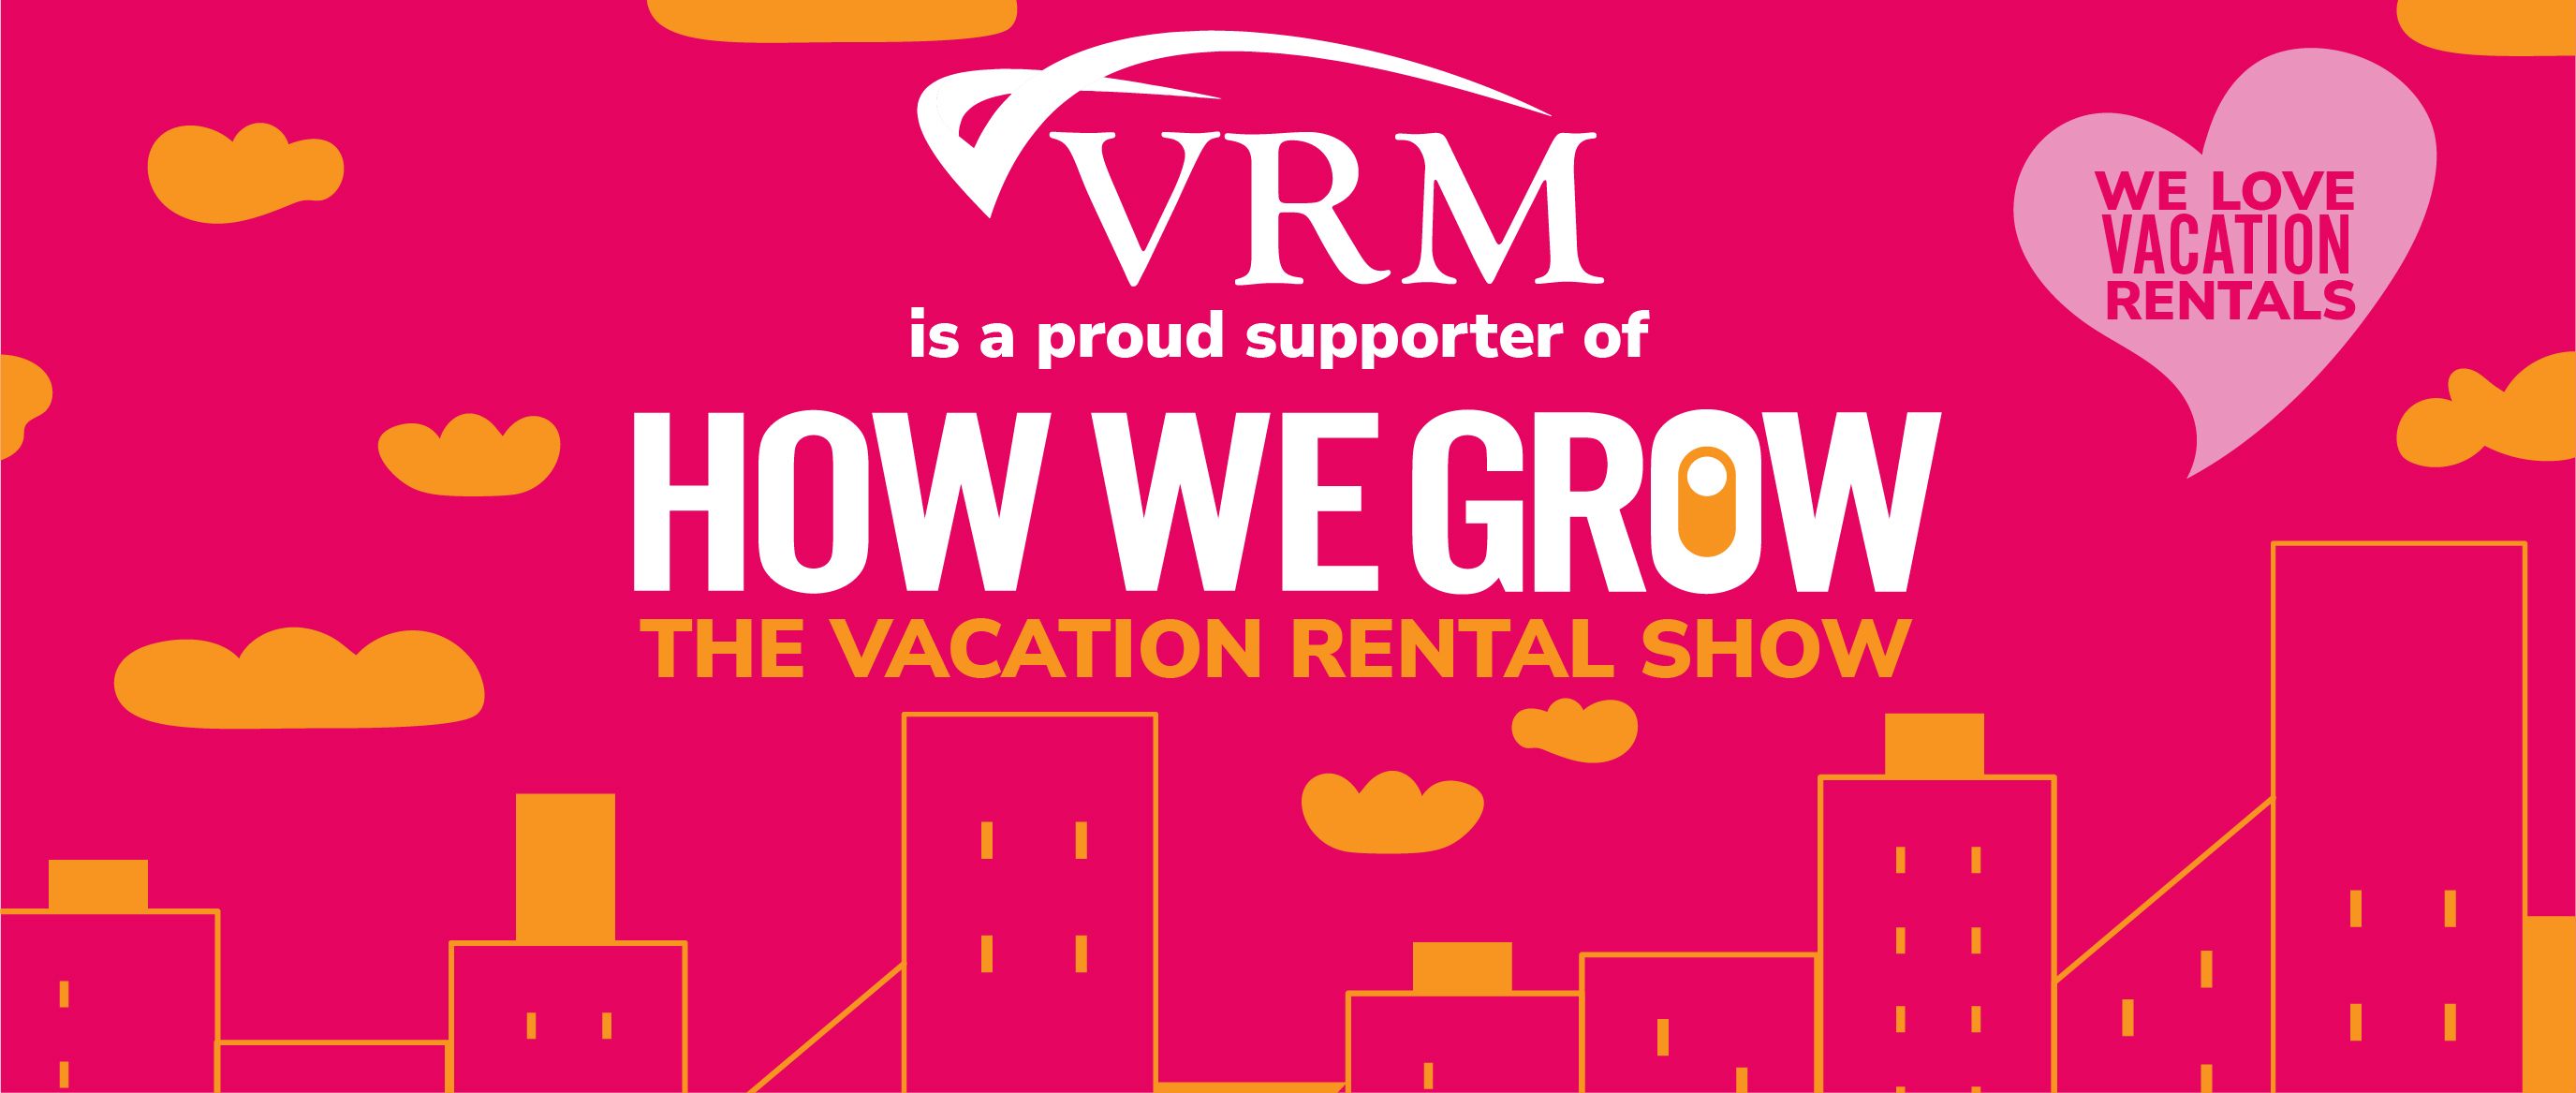 How We Grow: The Vacation Rental Show